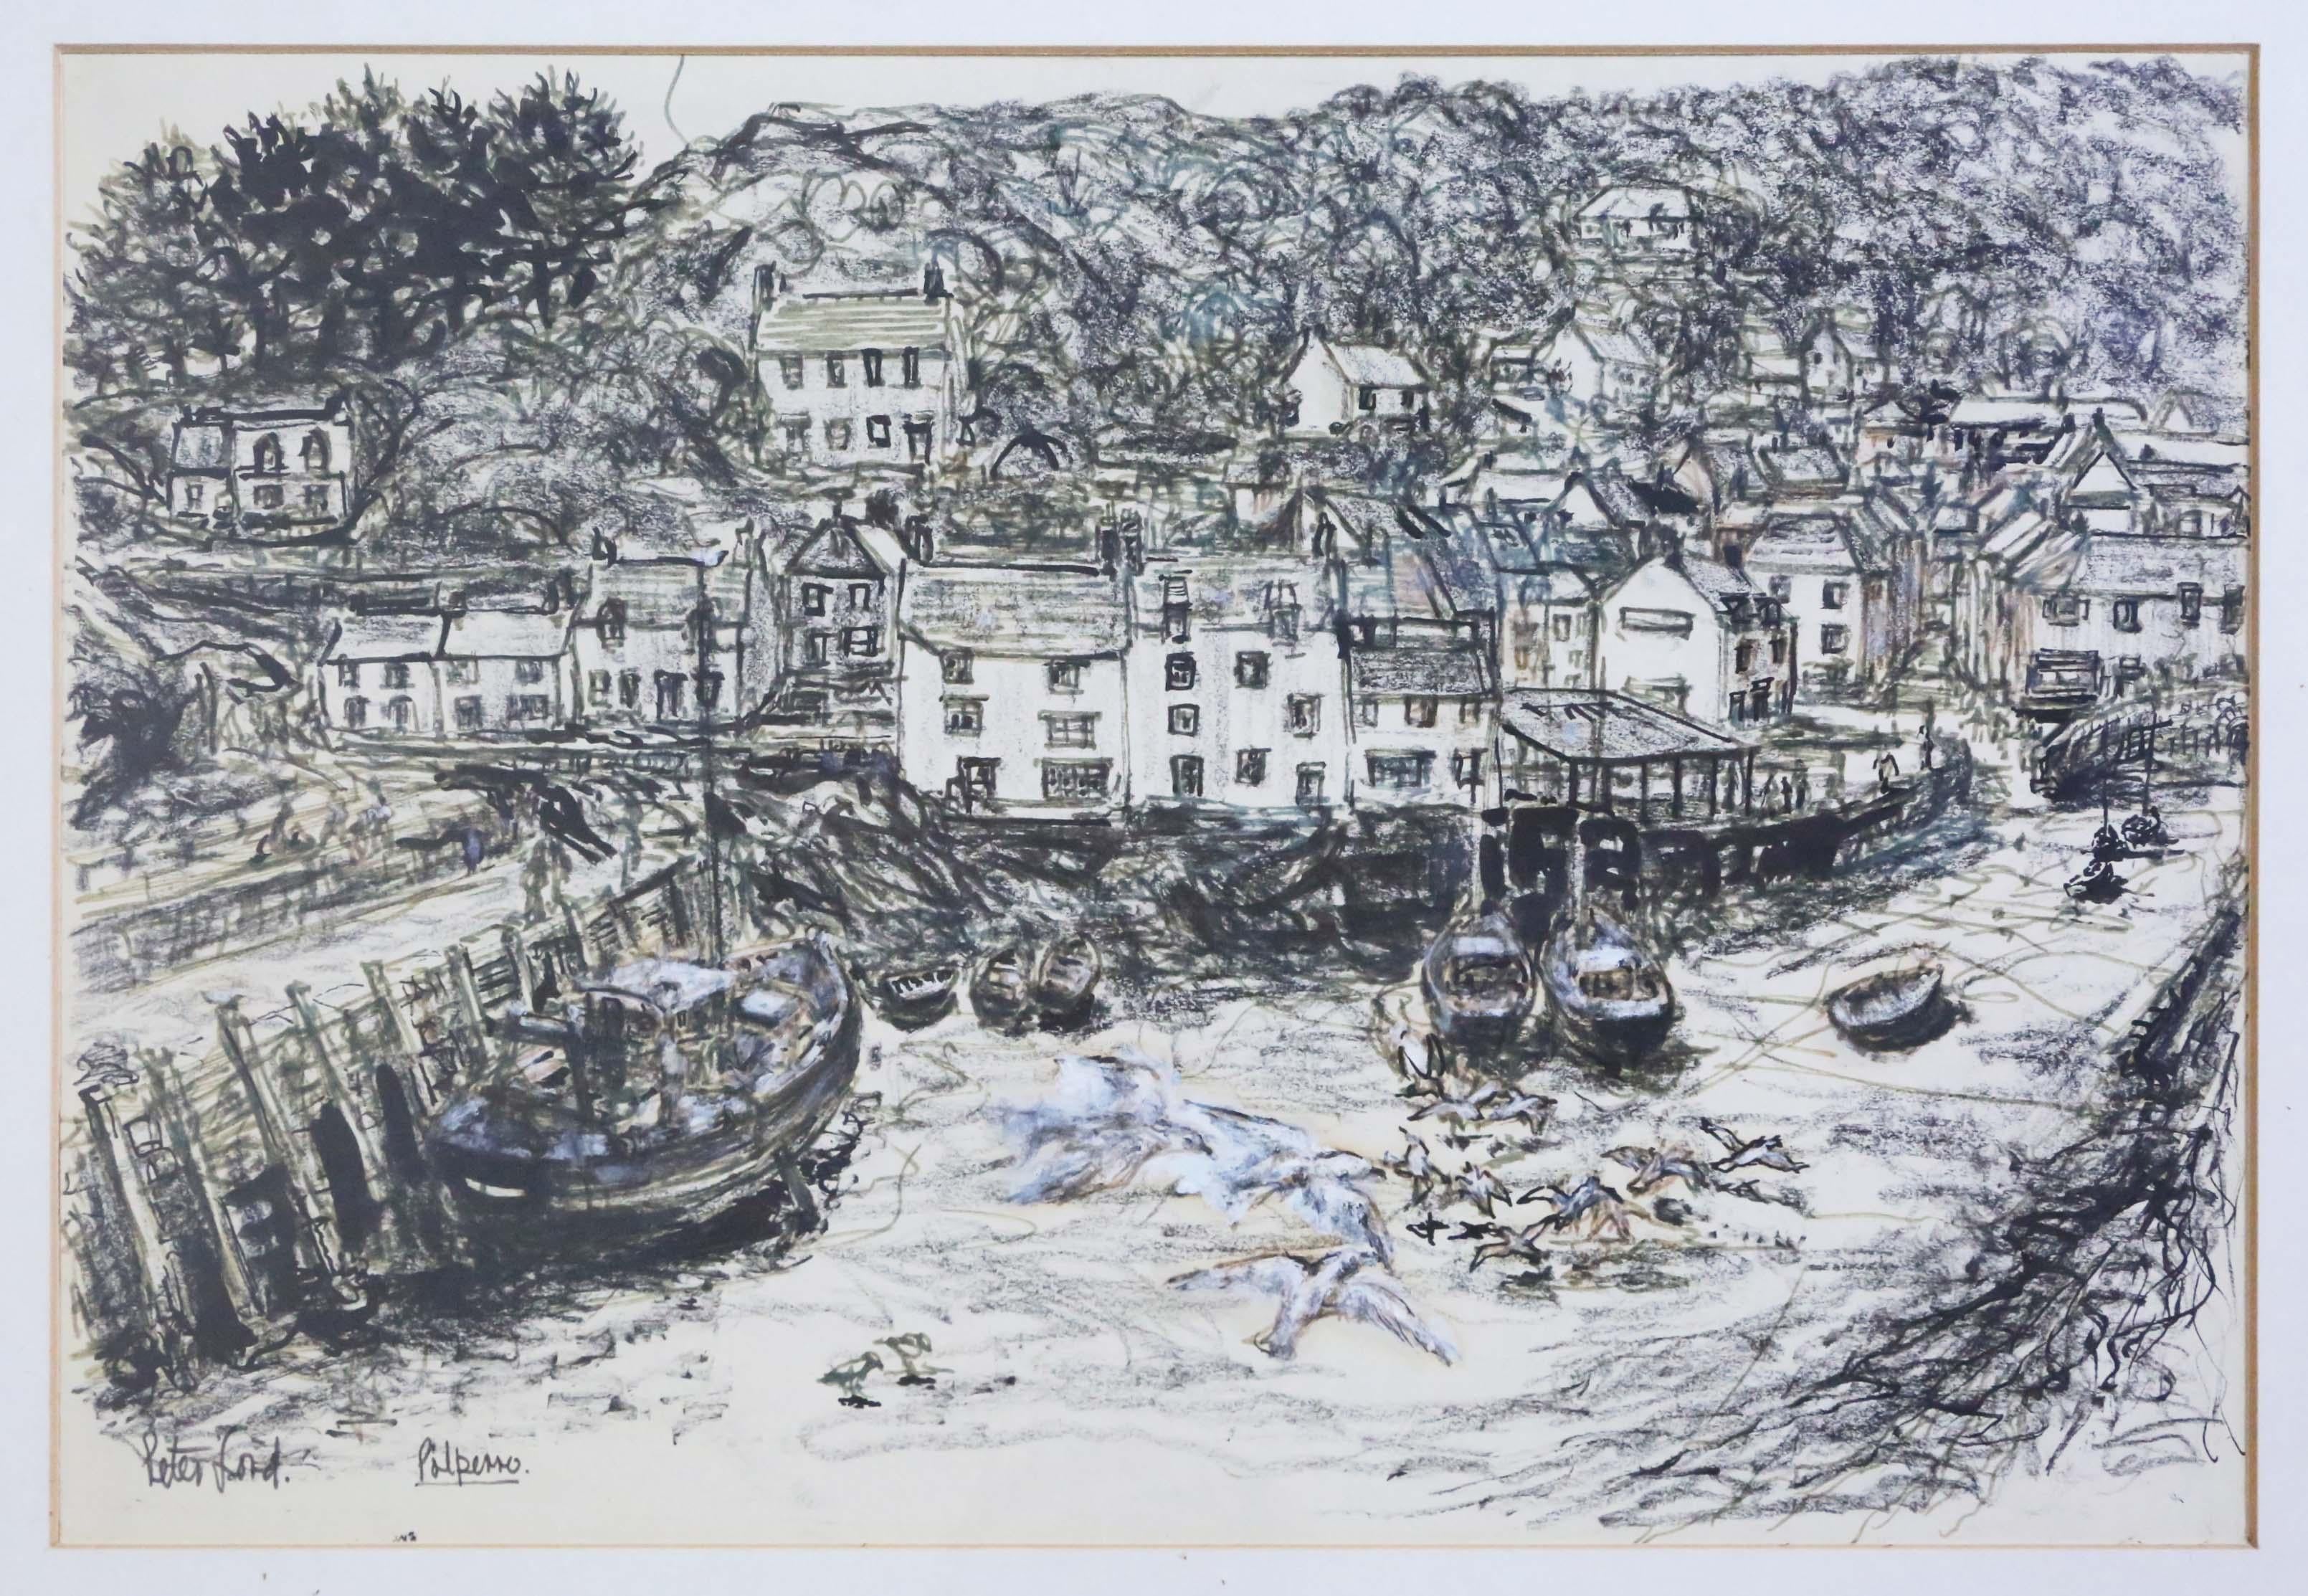 Large fine quality pencil, paint, ink and pastel original vintage / antique drawing painting artwork, depicting Polperro Harbour in Cornwall by Peter Ford C1960-70.

Something really different that would look great in the right location!

In